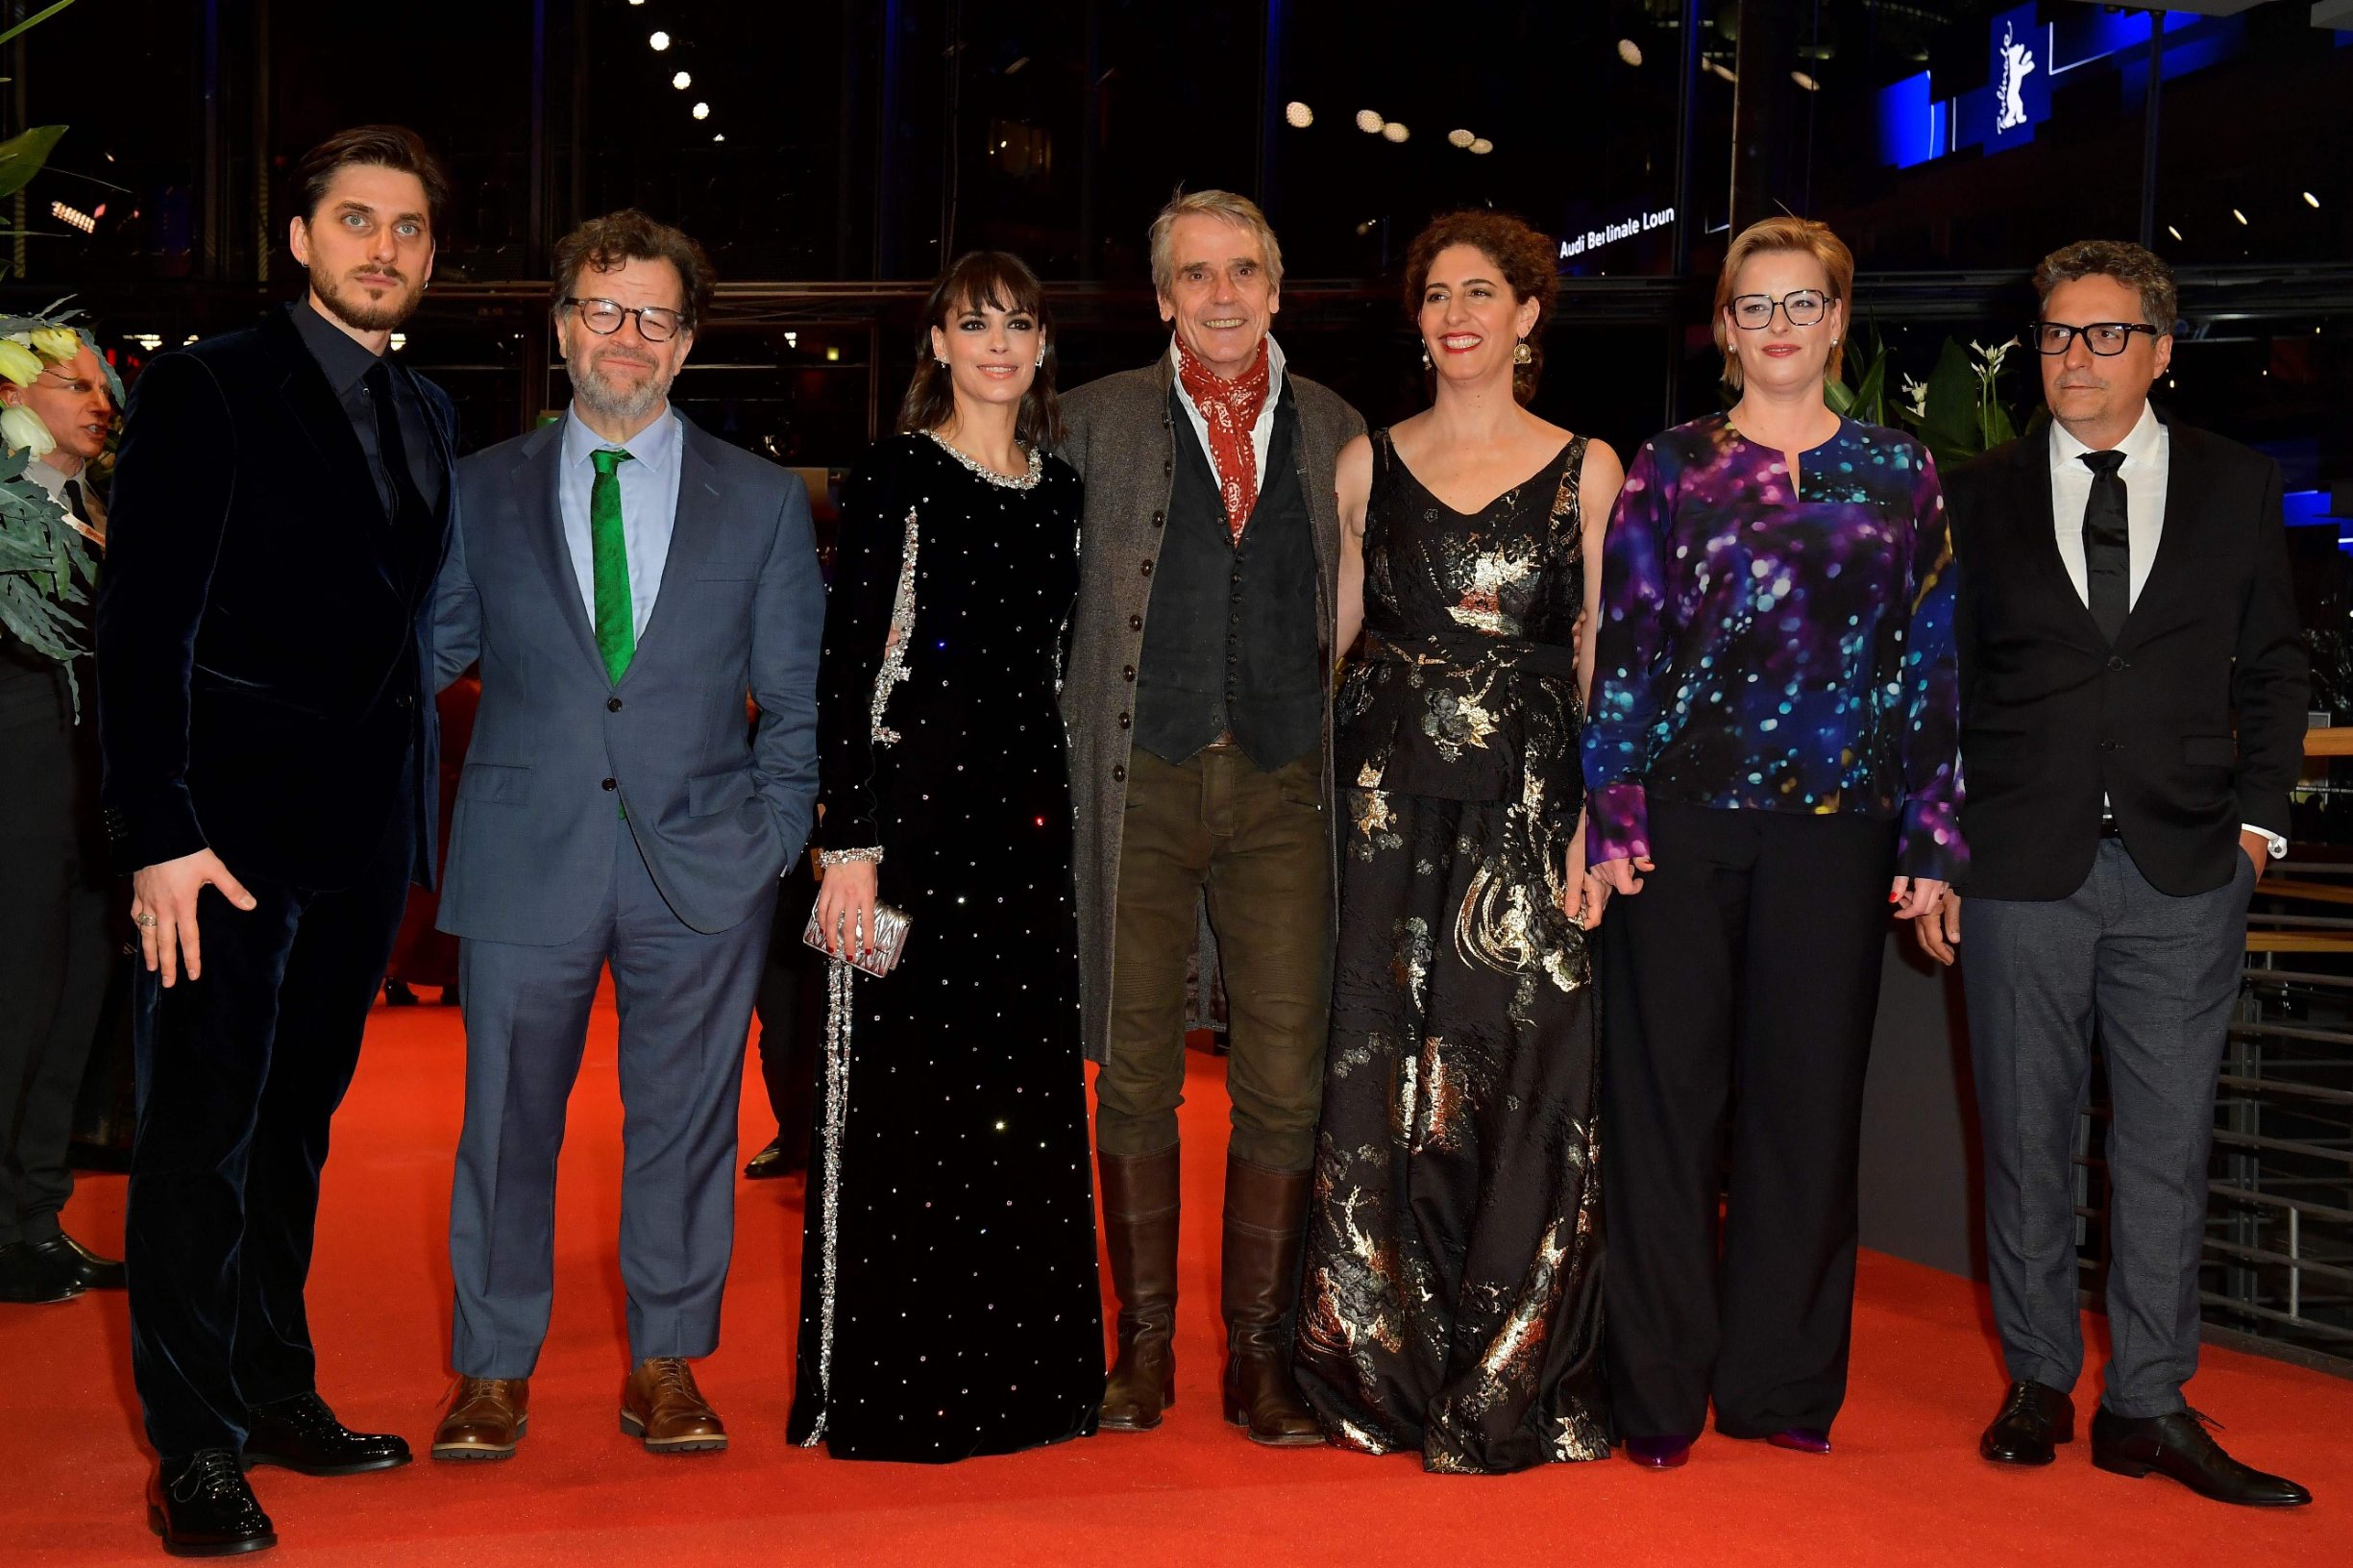 The Berlinale 2020 film festival International Jury German film producer Bettina Brokemper (2ndR), Italian actor Luca Marinelli (L), French-Argentinian actress Berenice Bejo (3rdL) Jury director British actor Jeremy Irons (C), US director Kenneth Lonergan (2ndL), Palestinian-US film director and writer Annemarie Jacir (3rdR) and Brazilian director Kleber Mendonca Filho (R) pose on the red carpet before the opening ceremony of the 70th Berlinale international film festival on February 20, 2020 in Berlin. - The 11-day Berlinale, one of Europe's most prestigious film extravaganzas alongside Cannes and Venice, celebrates its 70th anniversary in 2020 and runs until March 1, 2020. (Photo by Tobias SCHWARZ / AFP)